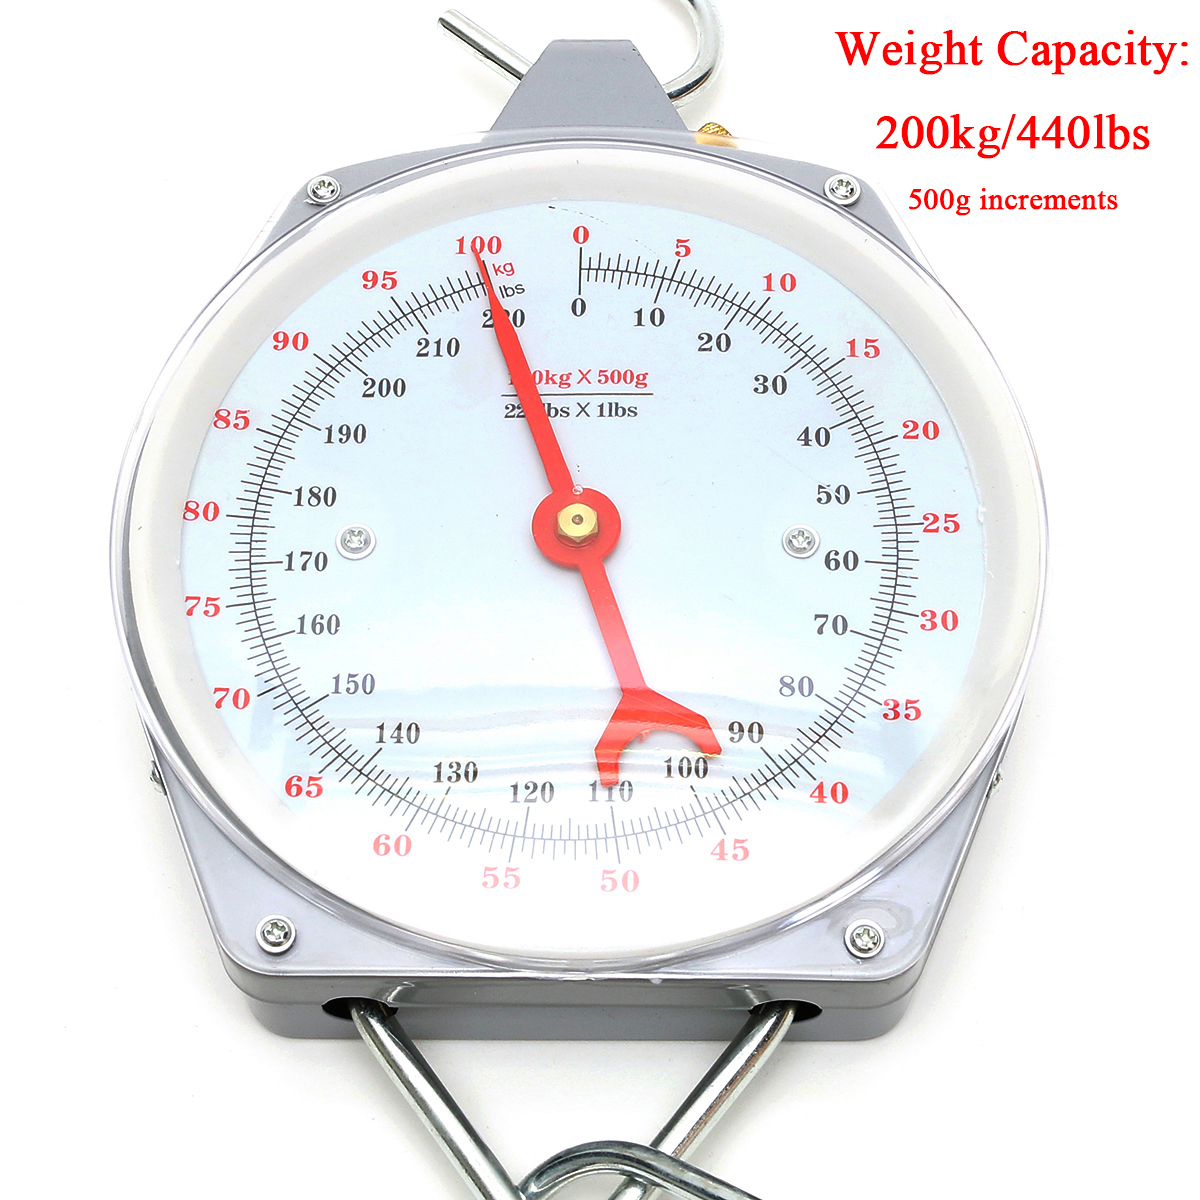 100kg220lbs-Clockface-Hanging-Scale-Weighing-Butchering-with-Hook-1156011-5